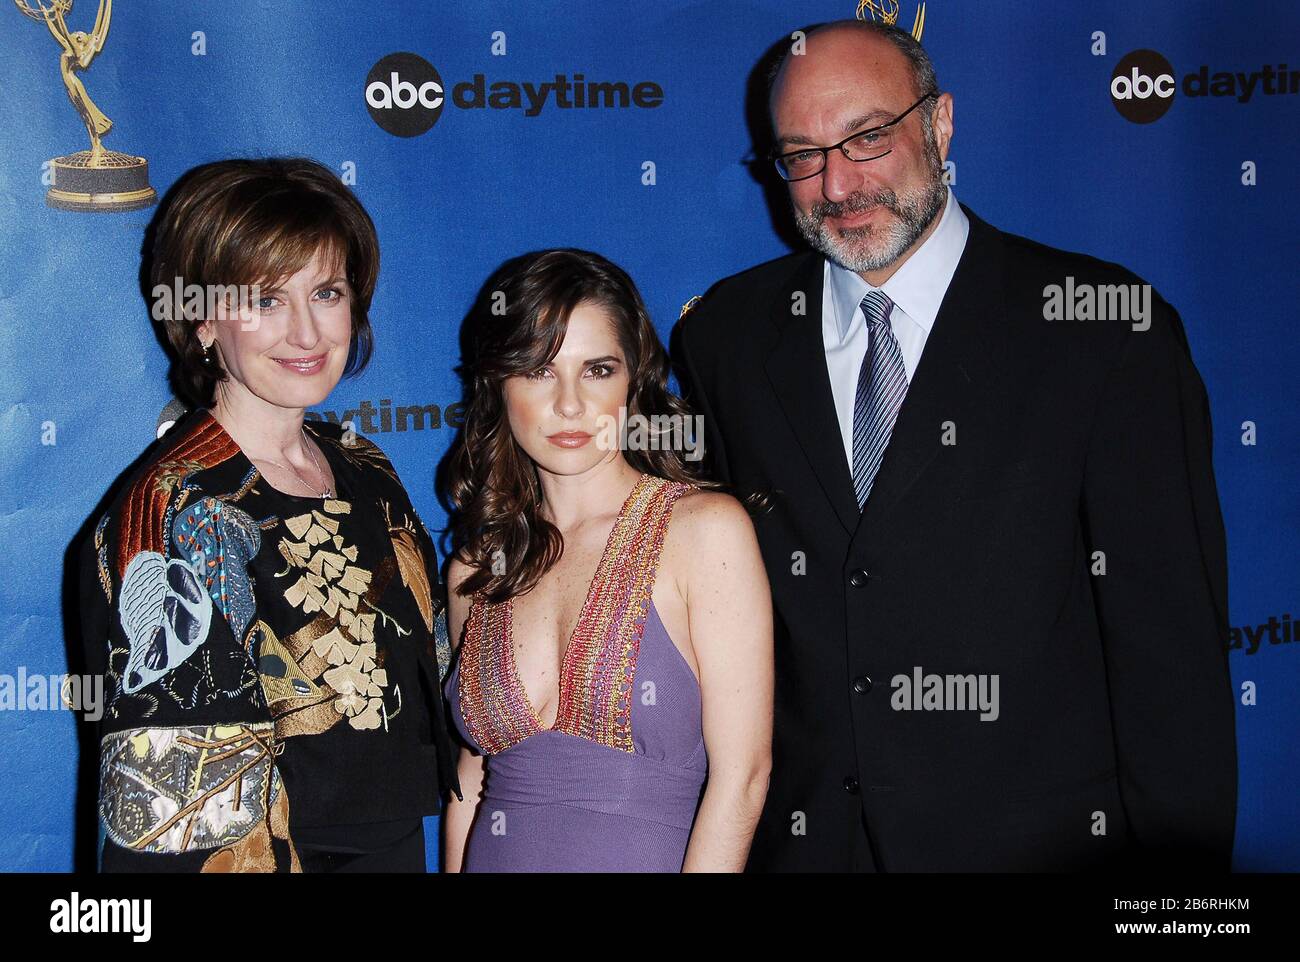 Anne Sweeney, Kelly Monaco and President of ABC Daytime Brian Frons at the ABC Daytime Emmy Nominees Dinner held at Spago in Beverly Hills, CA. The event took place on Friday, March 31, 2006.  Photo by: SBM / PictureLux - All Rights Reserved  -  File Reference # 33984-1208SBMPLX Stock Photo